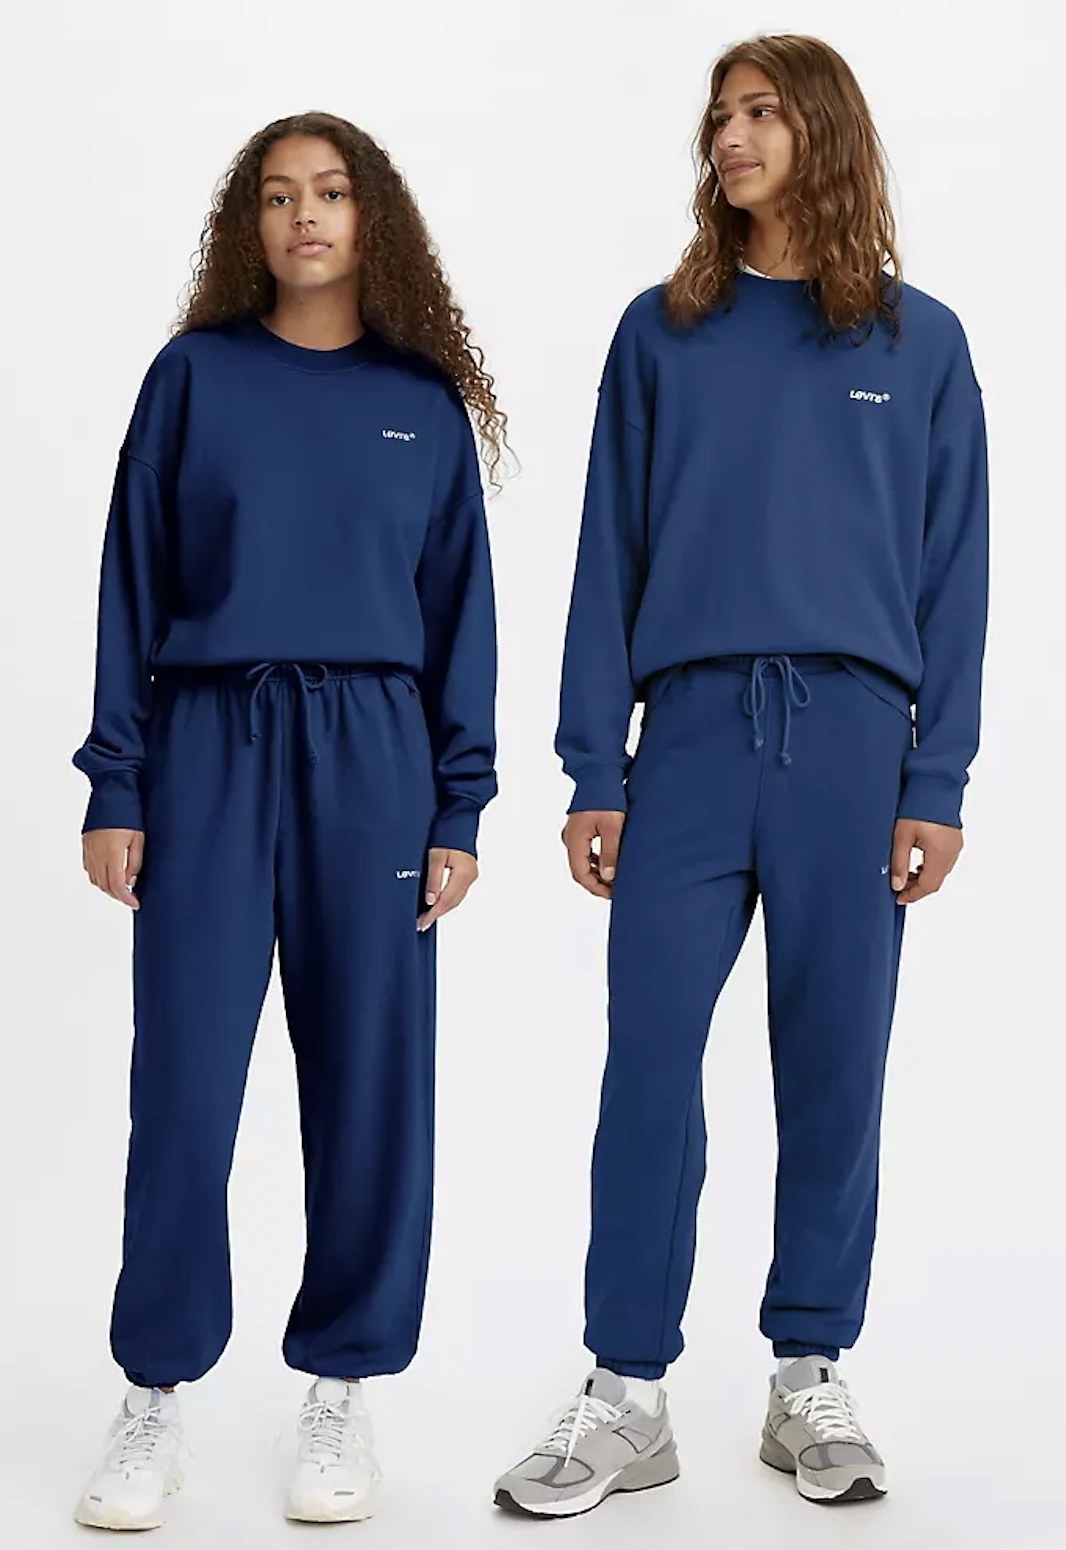 male and female model wearing the blue sweatsuits